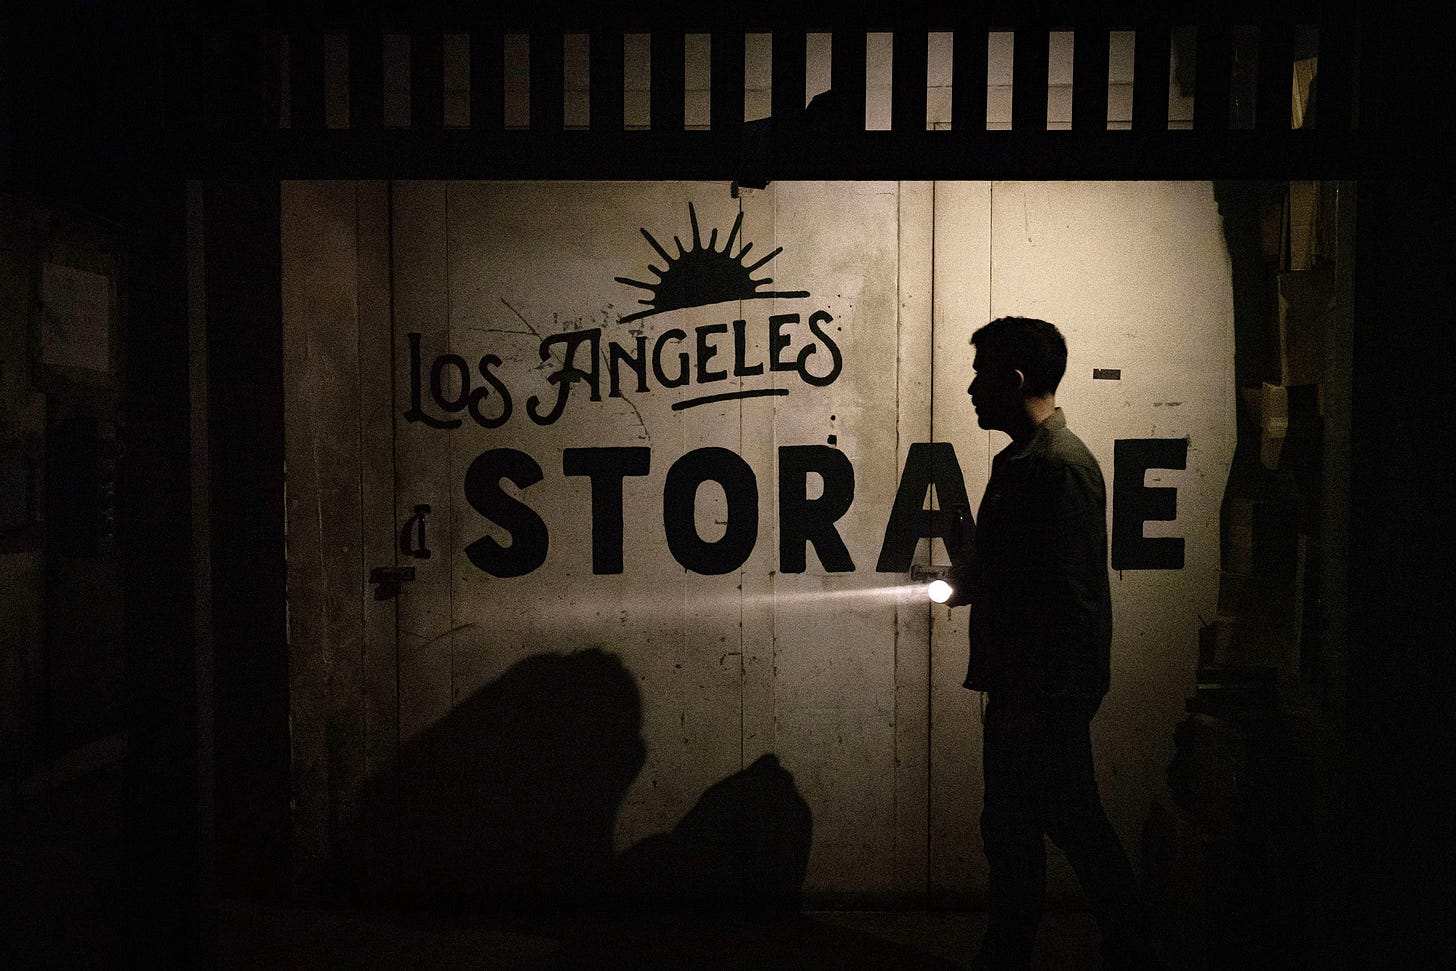 A person walks past a corridor with a sign for Los Angeles Storage